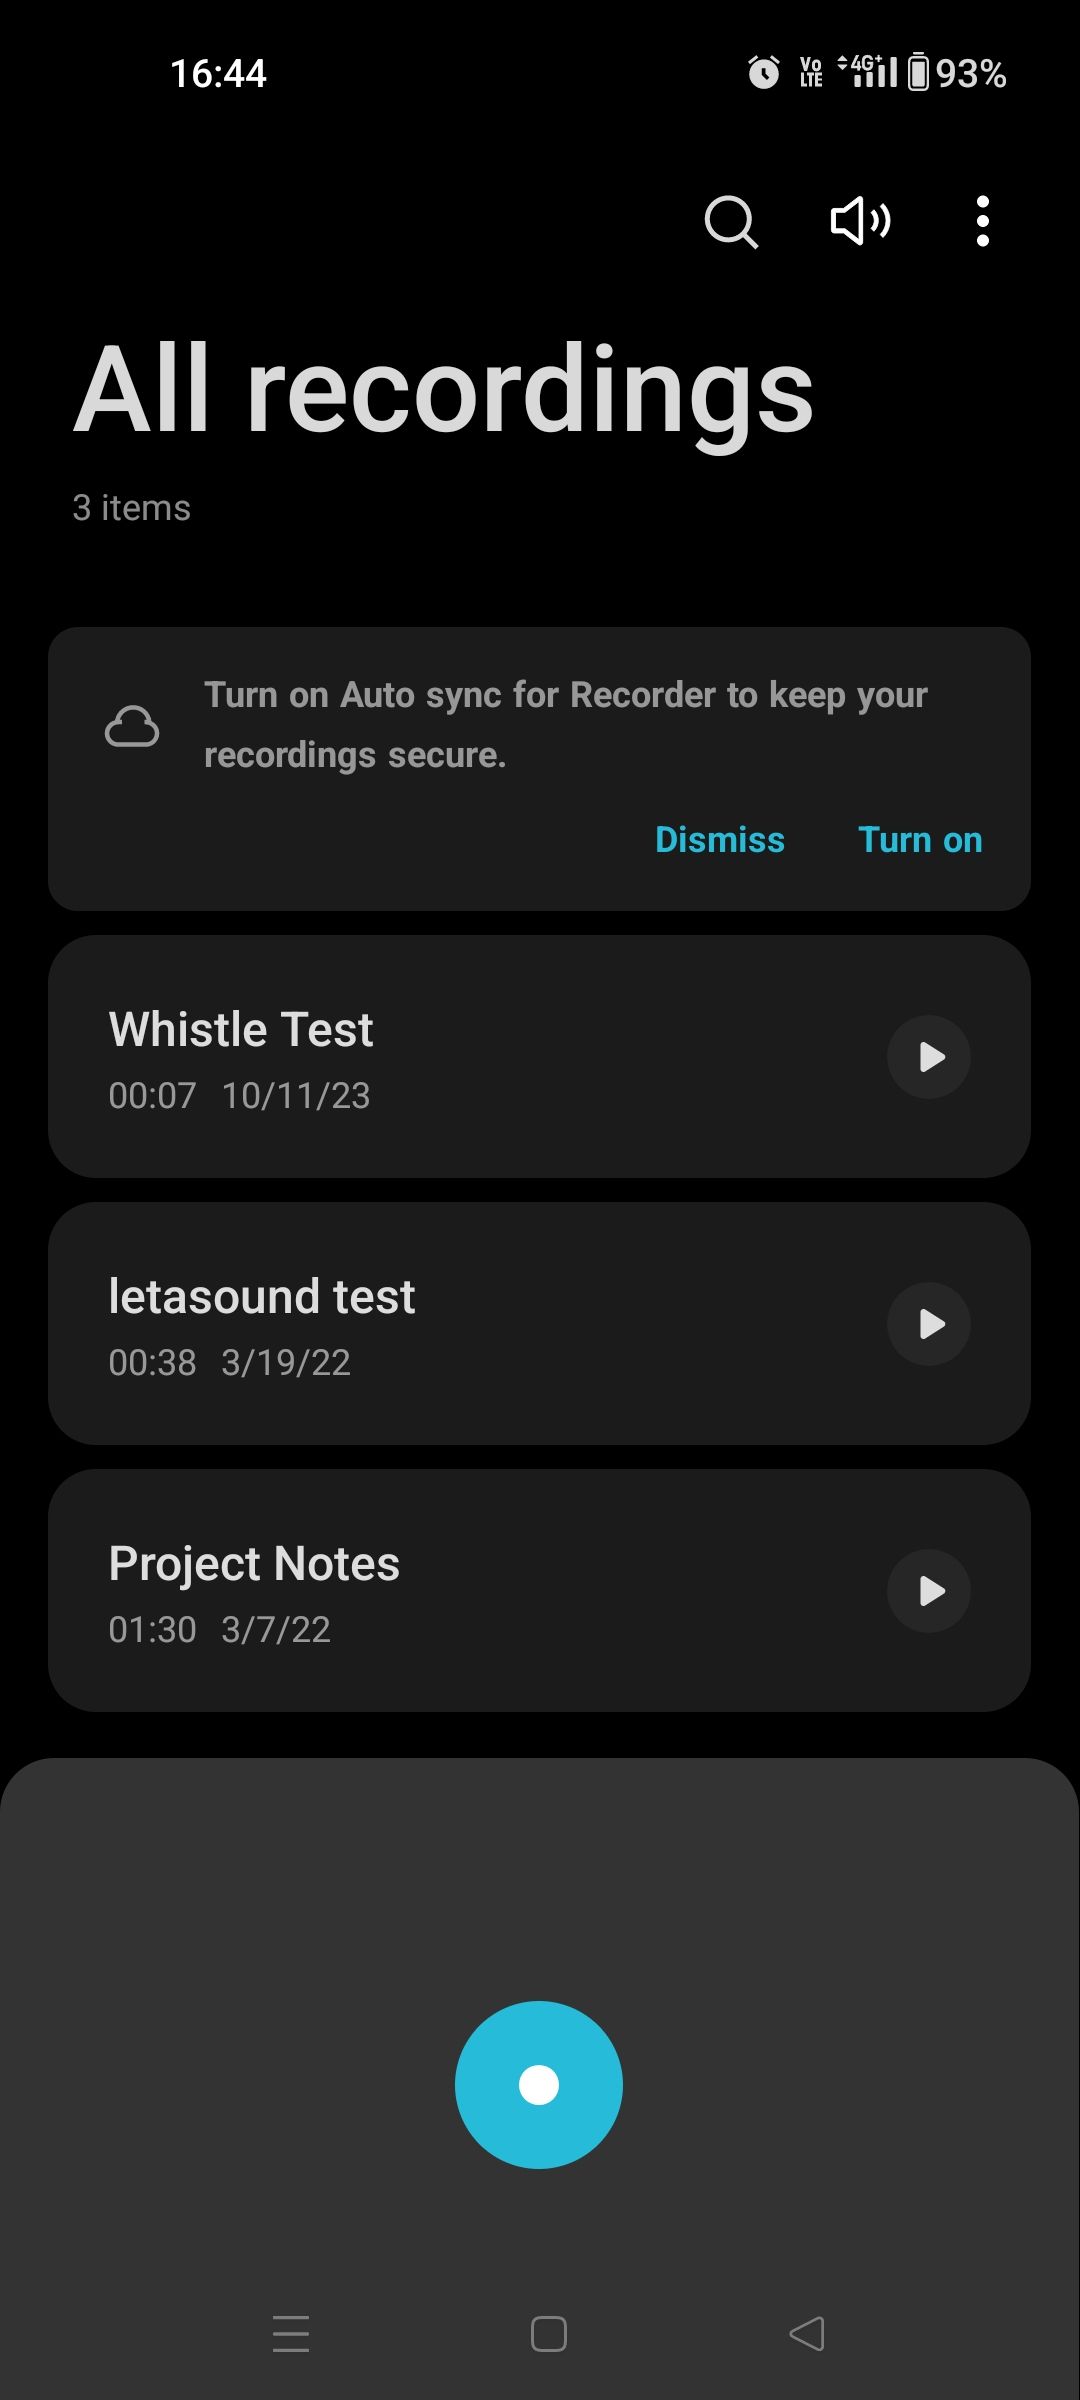 Tap Blue Record Button to Start Recording